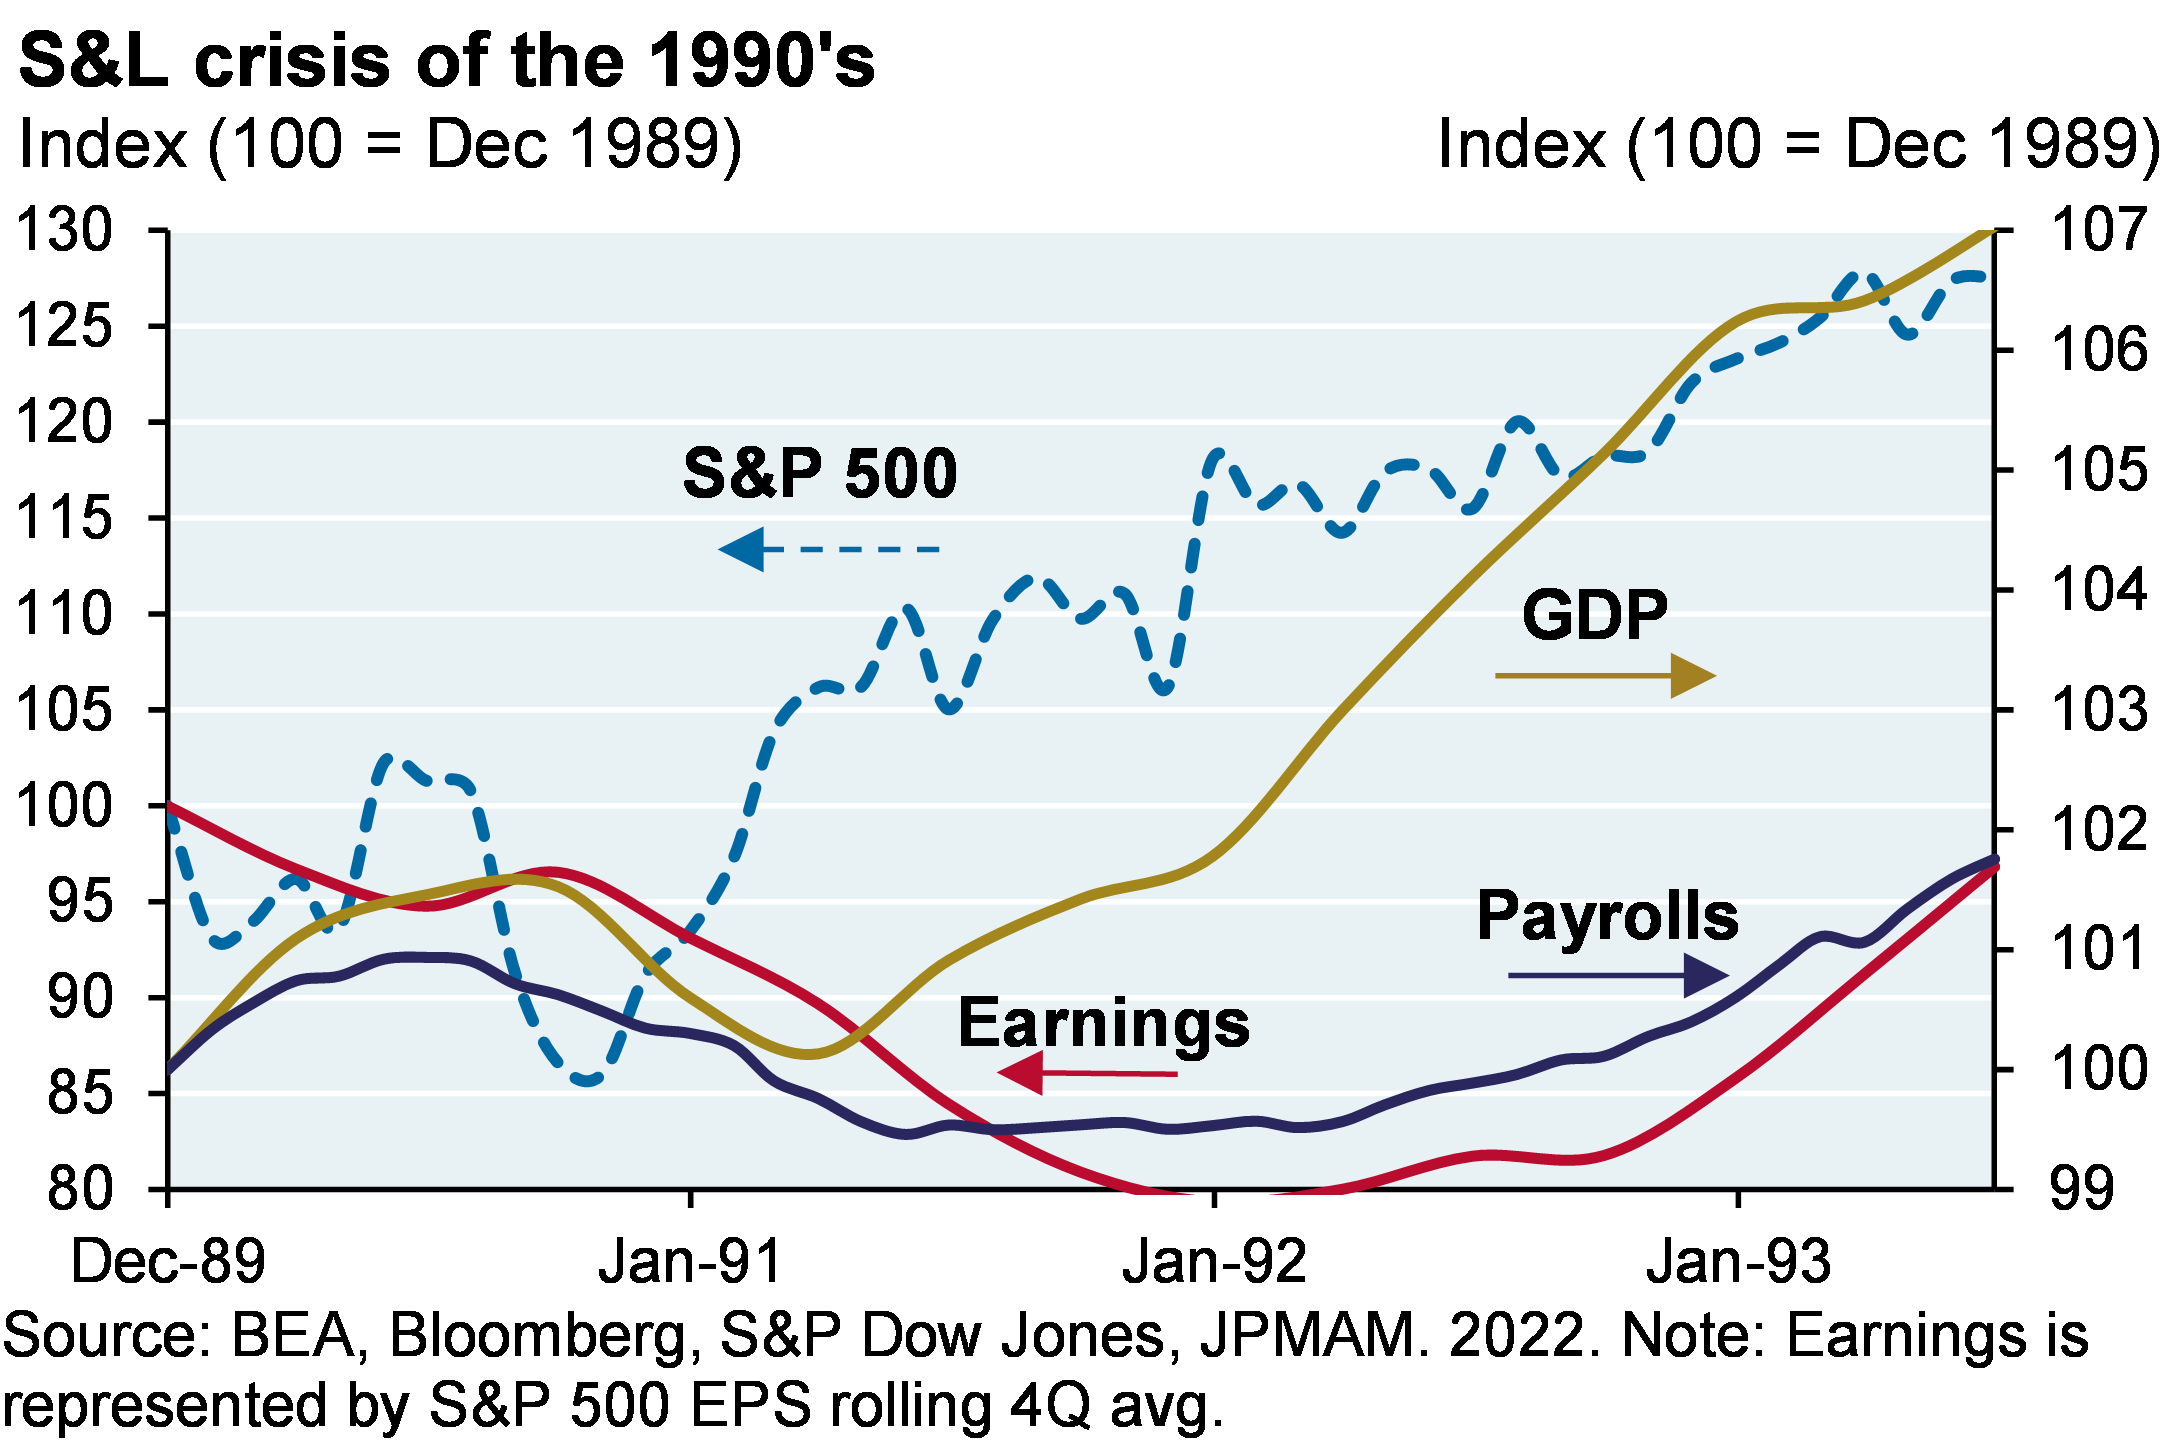 The indexed line chart compares the S&P 500, GDP, Earnings, and Nonfarm Payrolls throughout the S&L crisis from December 1989 to June 1993. The S&P 500 bottomed in October 1990, followed by GDP in March 1991, Payrolls in September 1991, and Earnings in December 1991. 